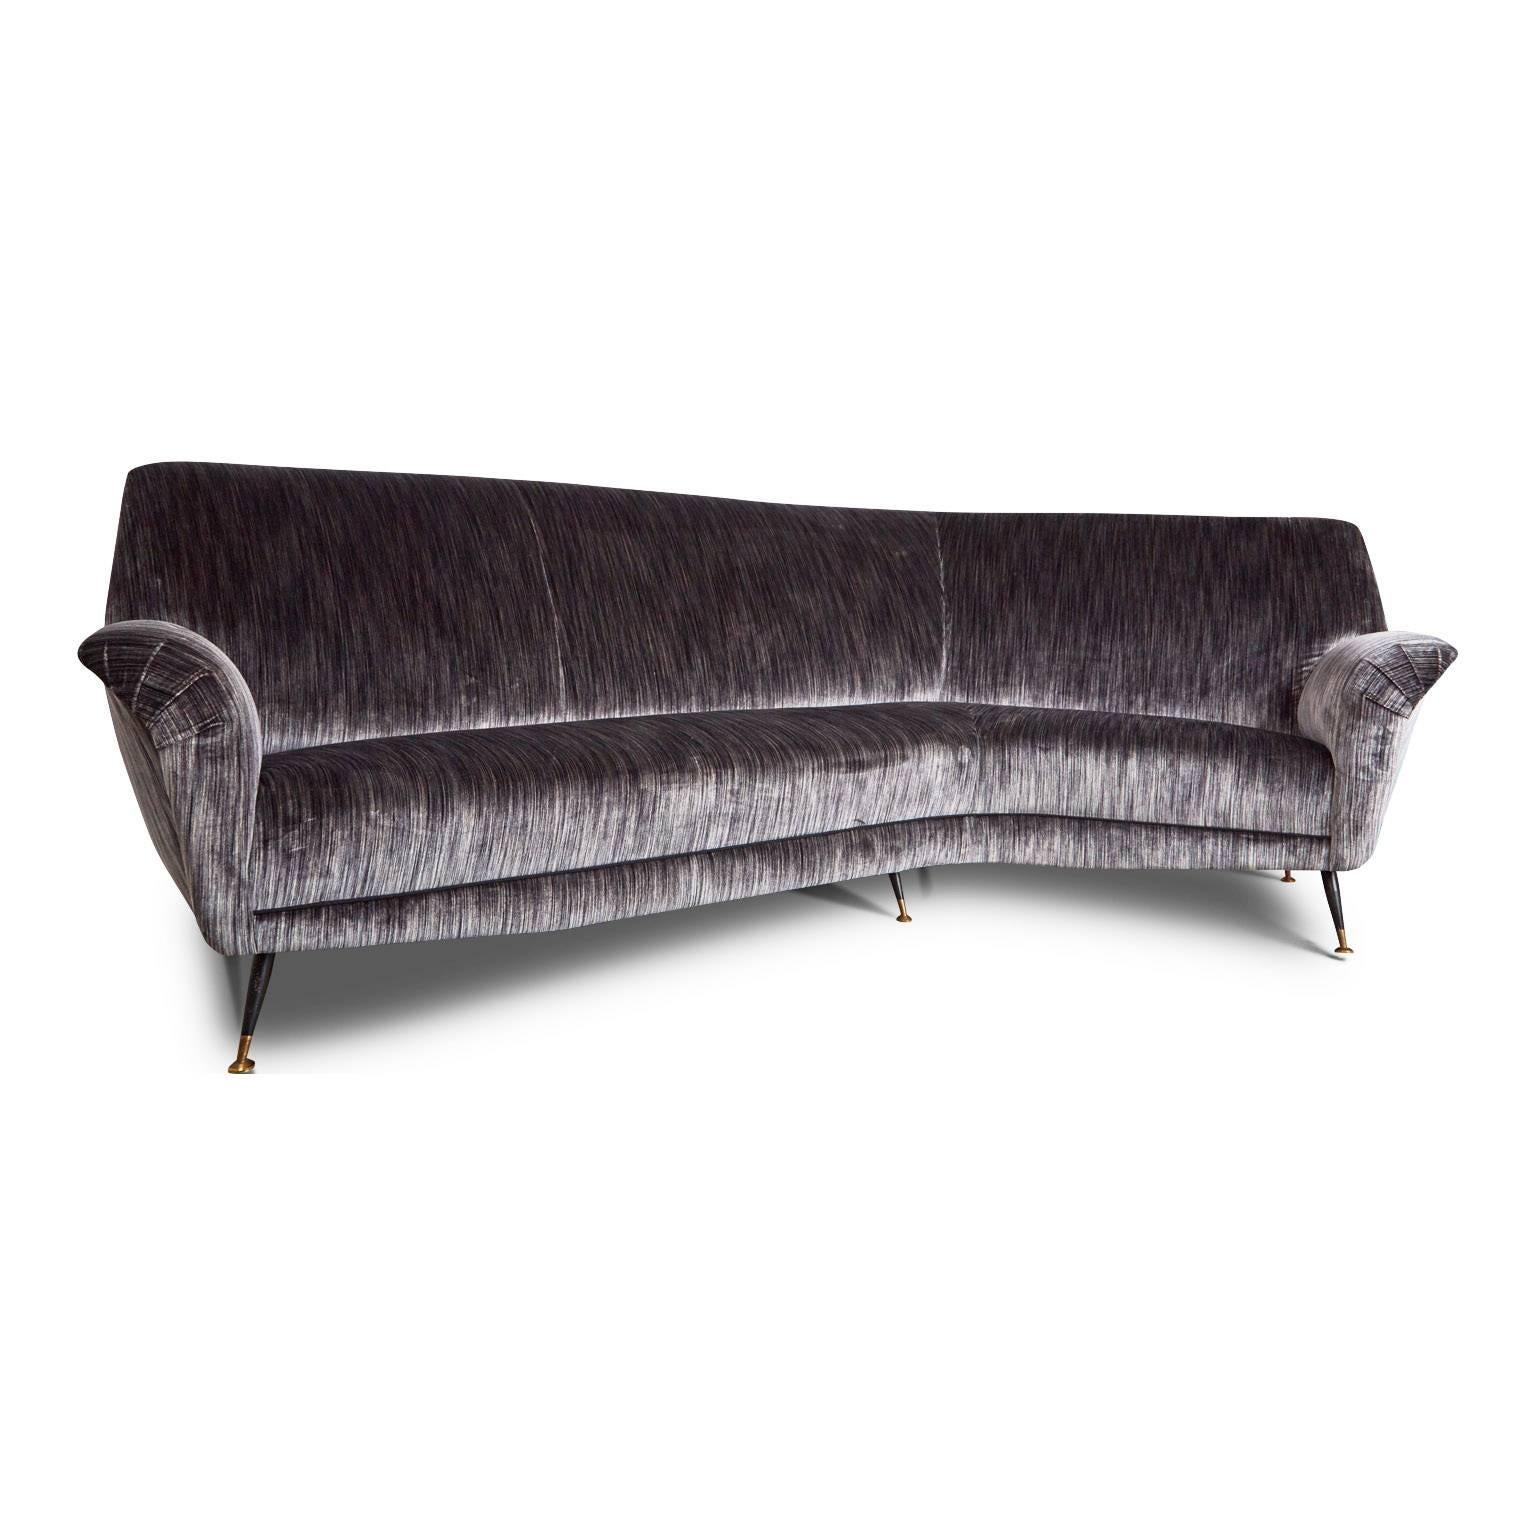 An elegantly silhouetted 1950s Italian curved sofa by Gigi Radice. Newly upholstered in a plush silk blend strie velvet, which changes its appearance with the light. The glossy sheen of the material can look almost silvery white or it can become a